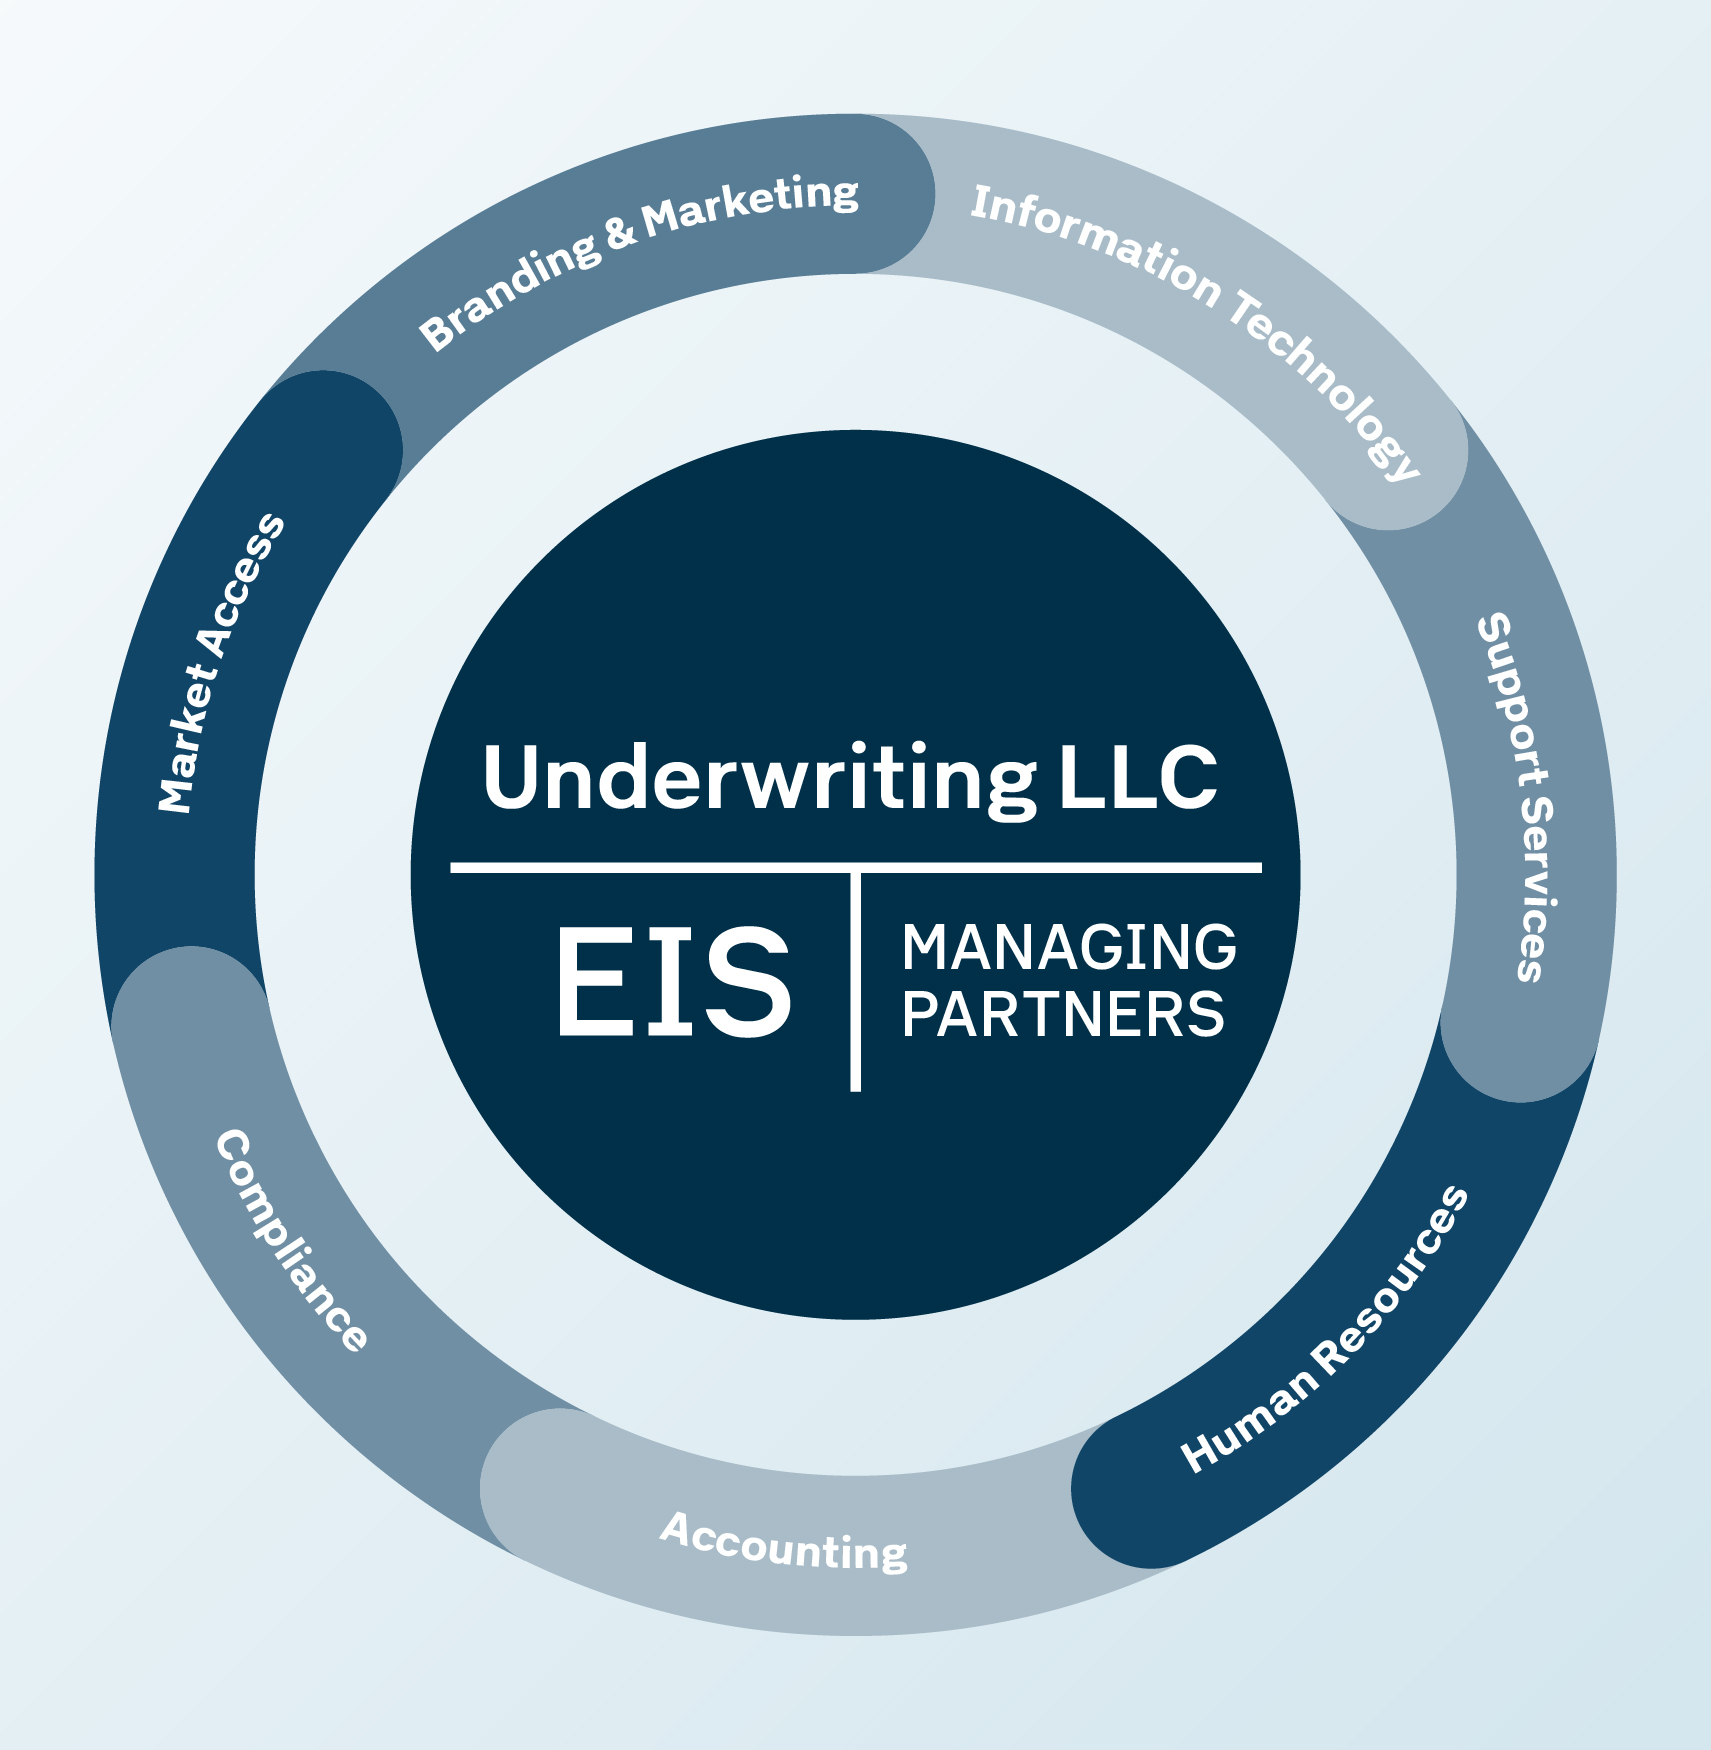 Euclid Program Managers Partner Model Diagram. A circle housing the Underwriting LLC, EIS, and Managing Partners, surrounded by a outer circle divided in seven sections: Market Access, Branding & Marketing, Information Technology, Support Services, Human Resources, Accounting, Compliance.